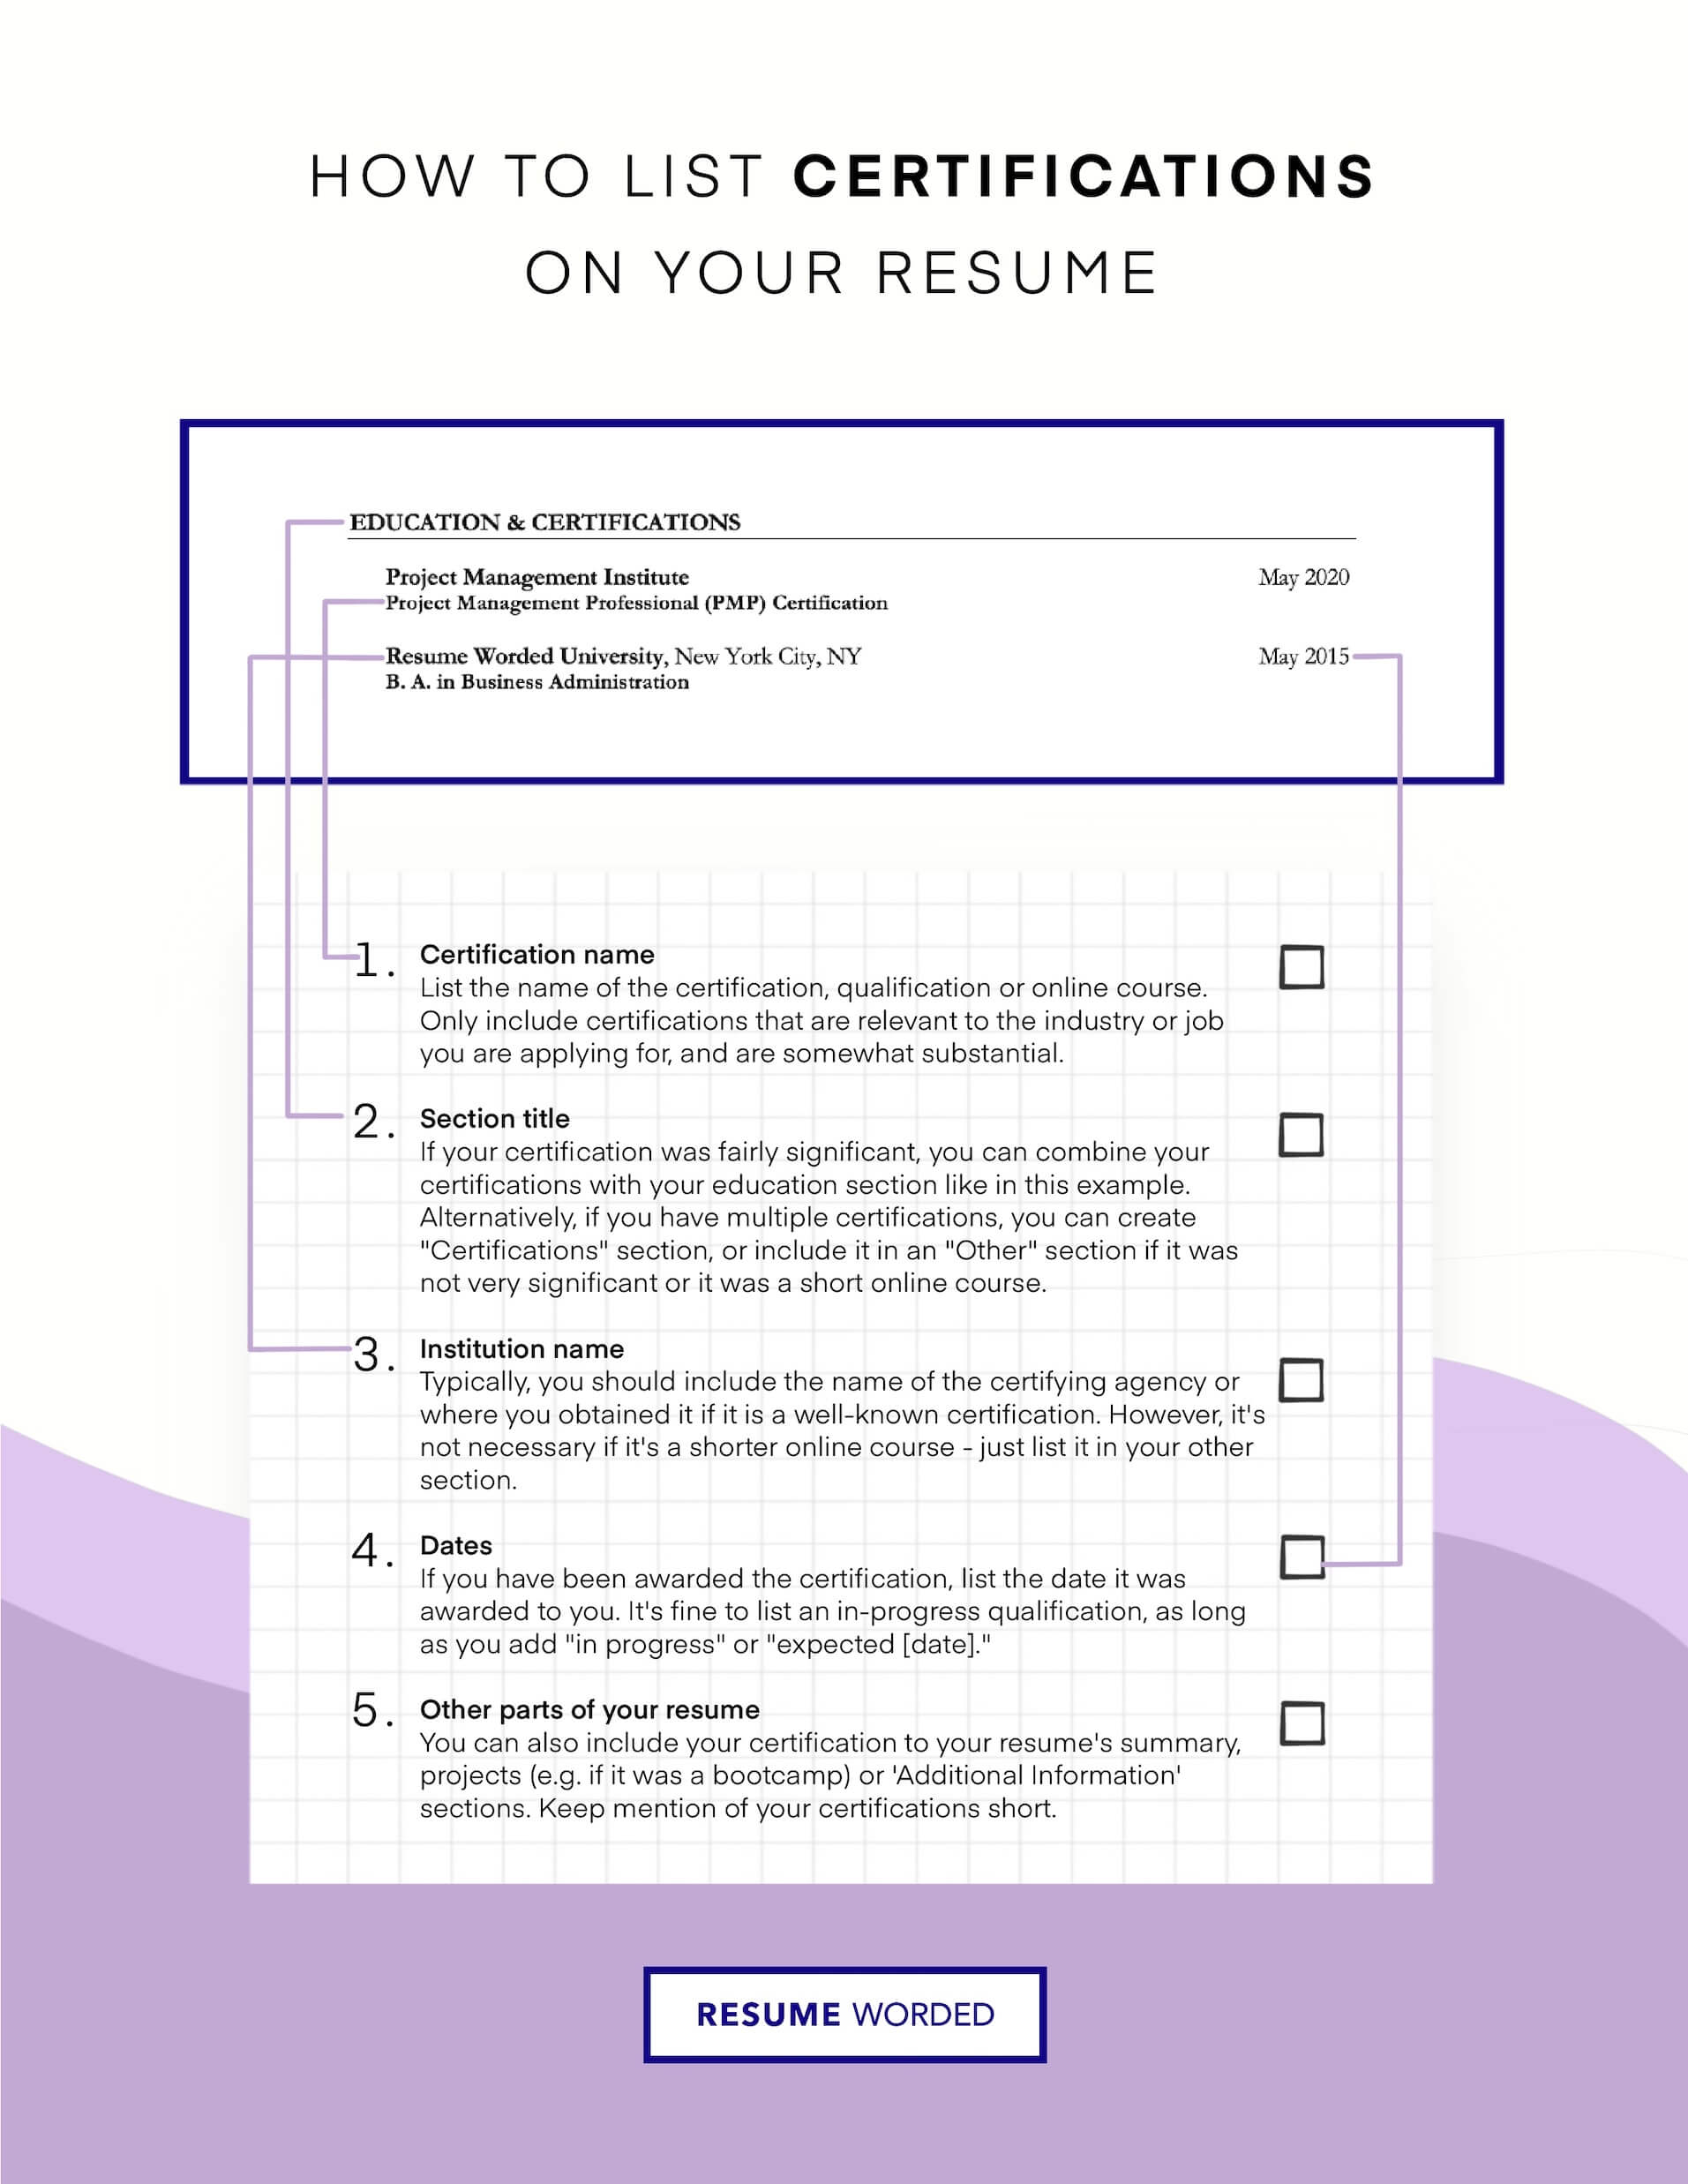 Include relevant certifications - Quality Engineer CV